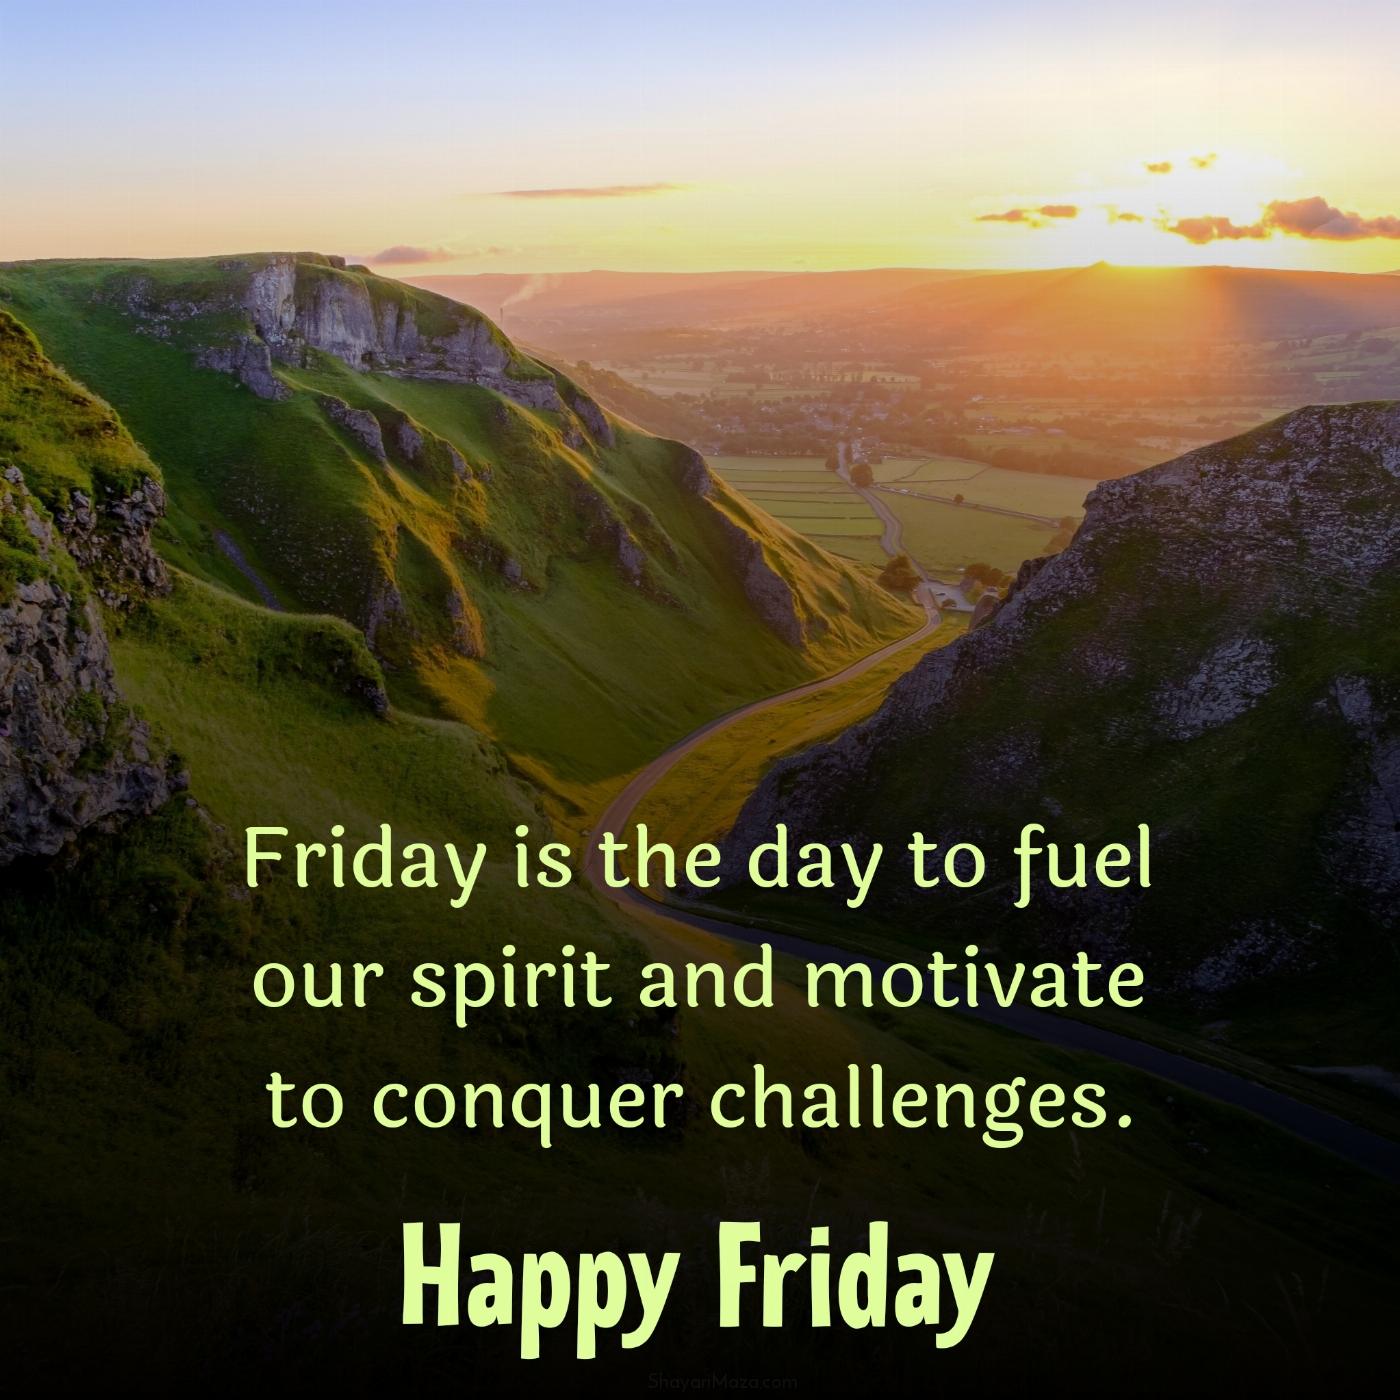 Friday is the day to fuel our spirit and motivate to conquer challenges